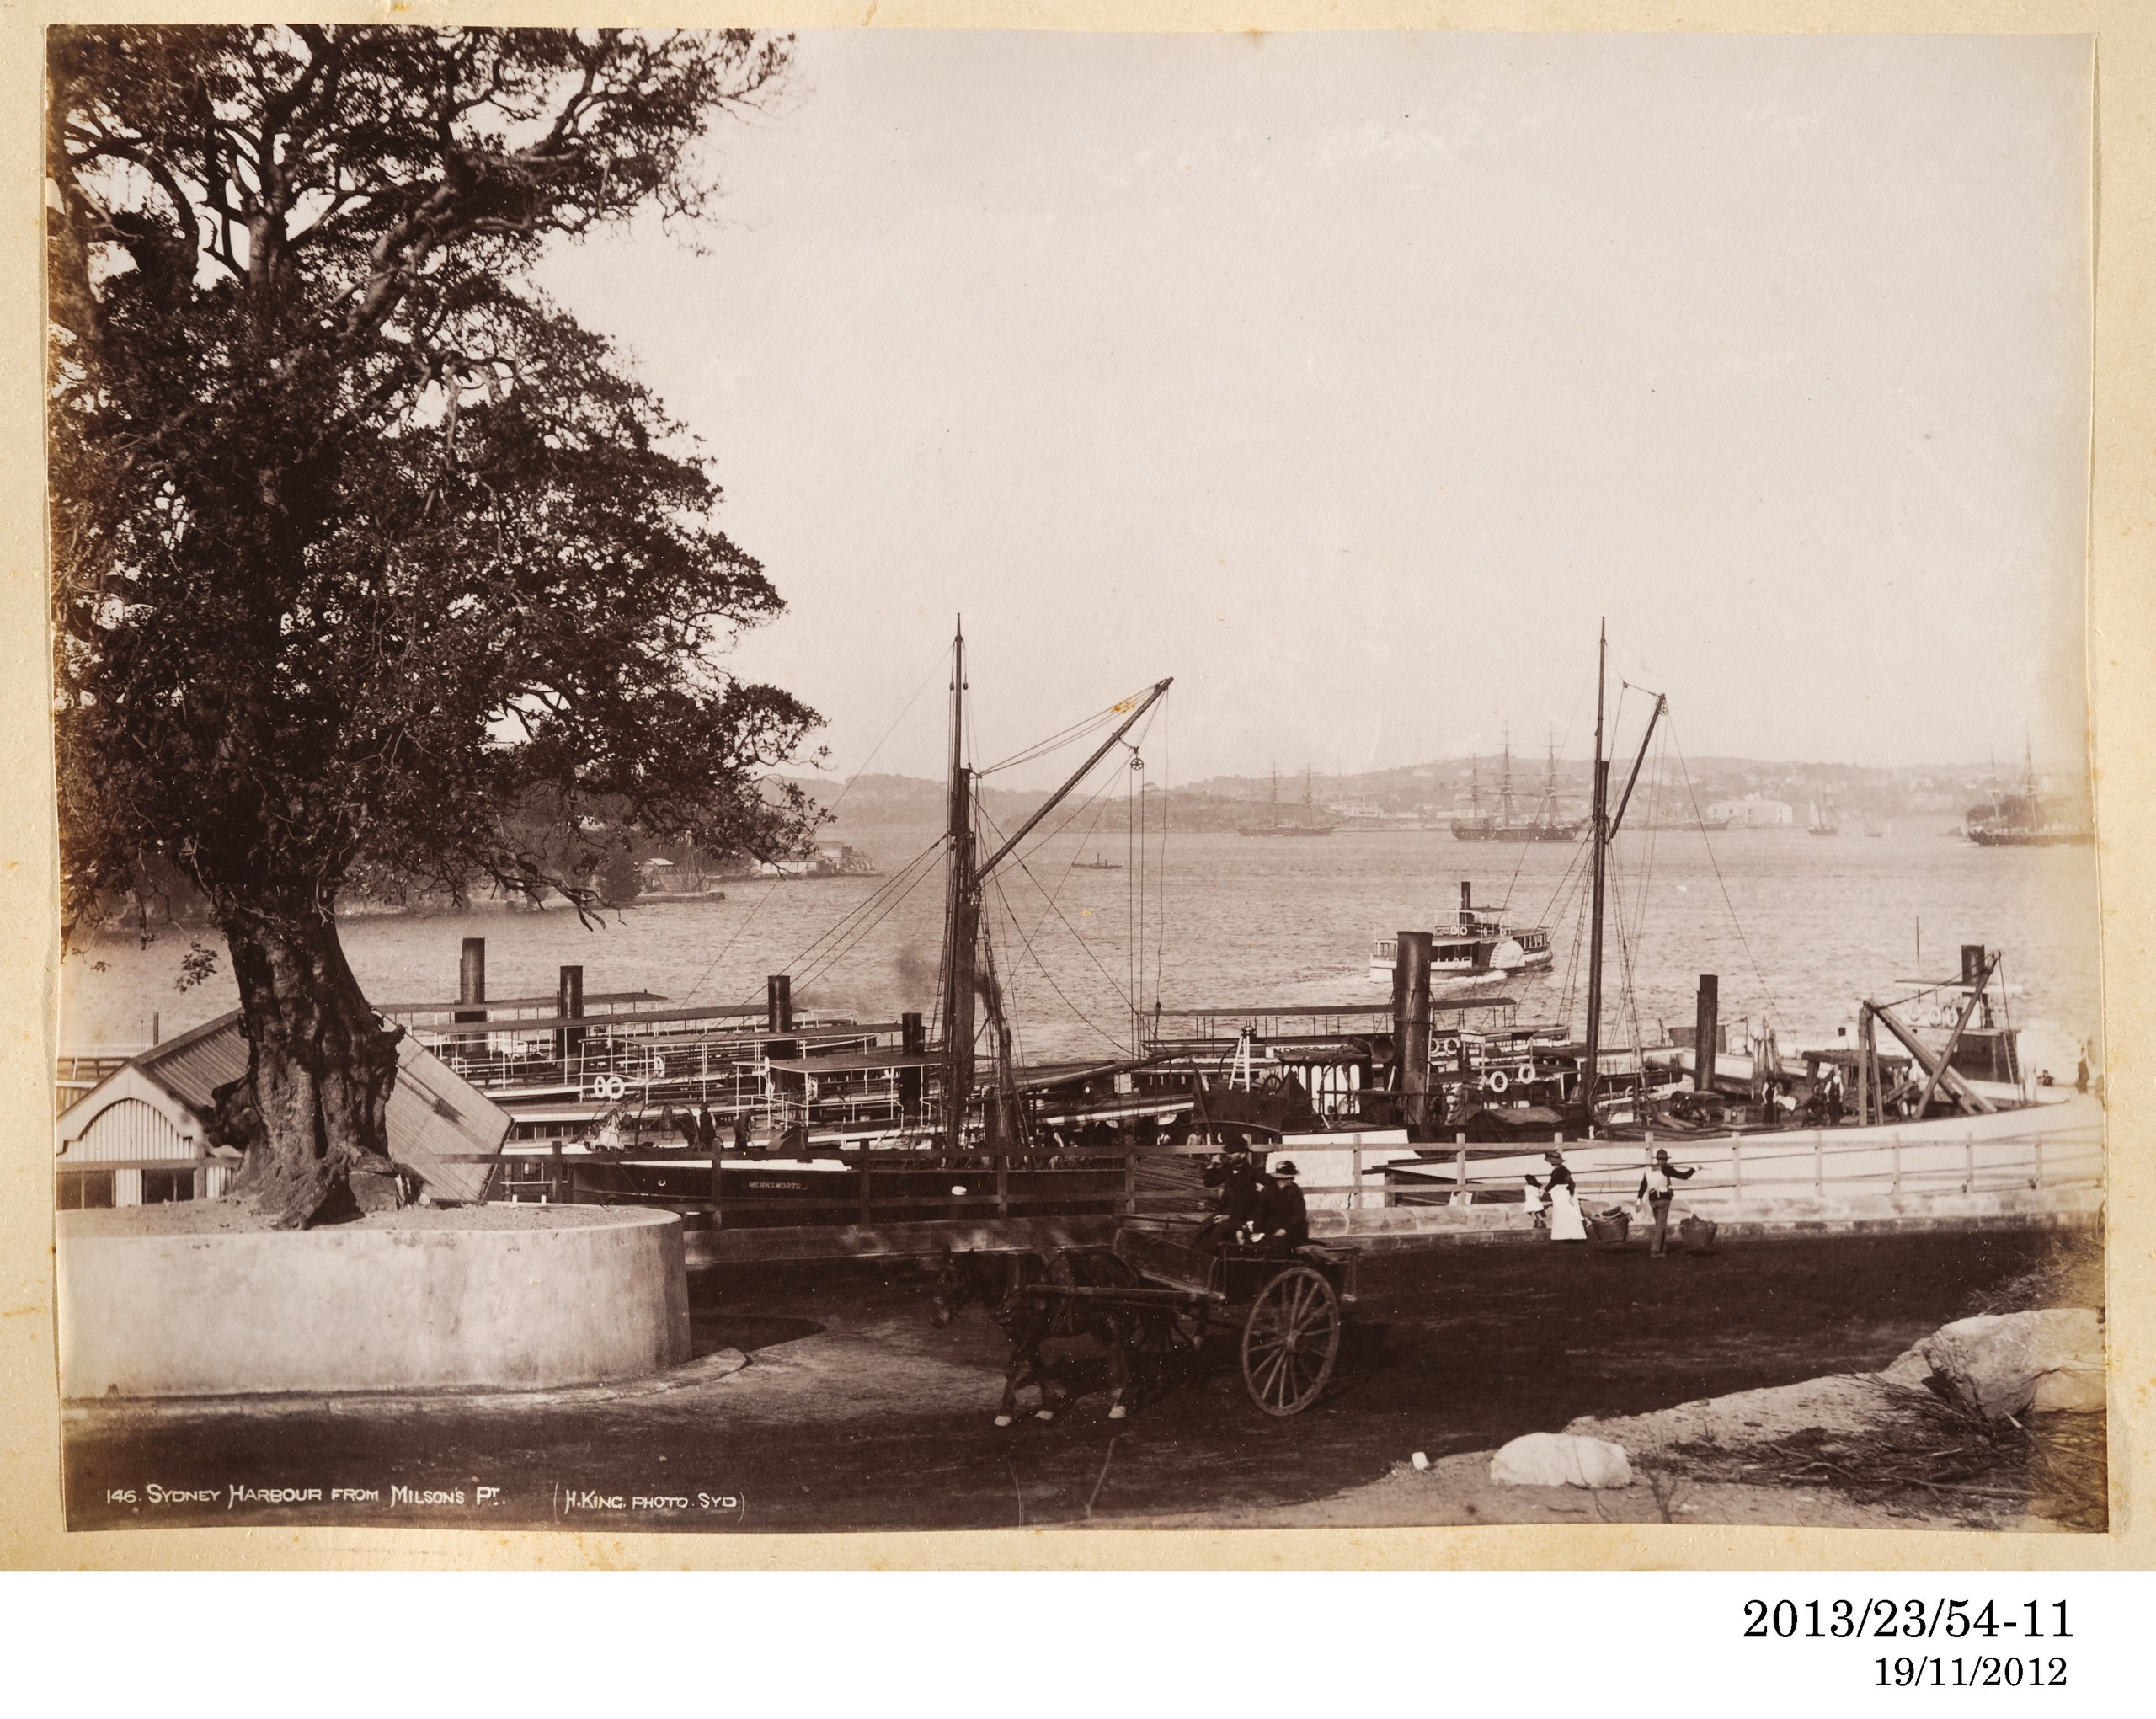 Photograph of ferries and a barge lined up at Milson's Point